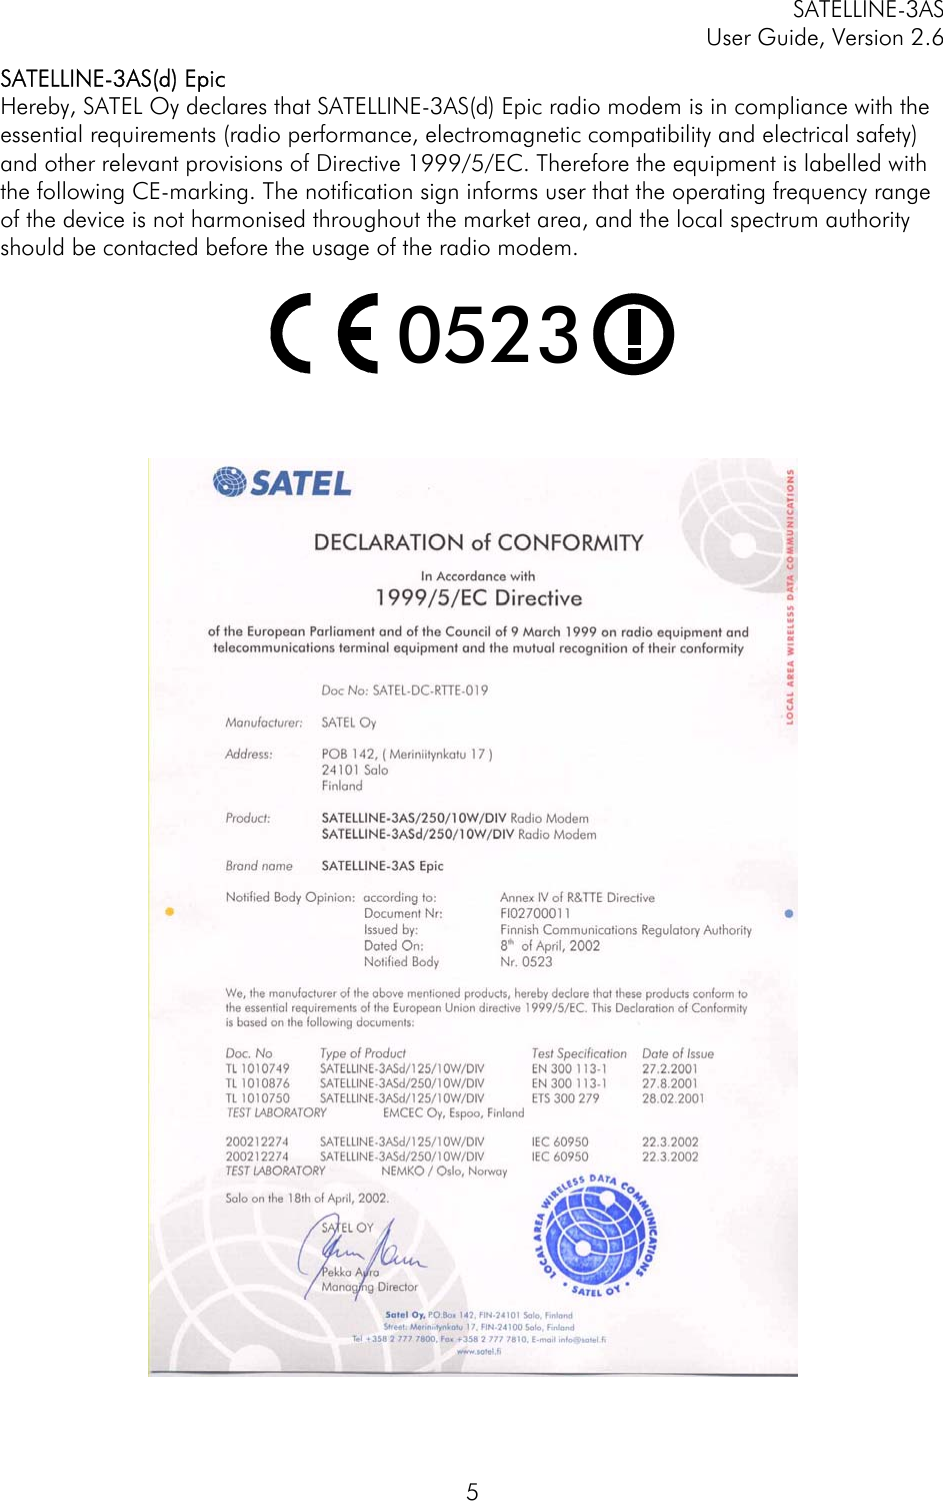 SATELLINE-3AS User Guide, Version 2.6   5SATELLINE-3AS(d) Epic Hereby, SATEL Oy declares that SATELLINE-3AS(d) Epic radio modem is in compliance with the essential requirements (radio performance, electromagnetic compatibility and electrical safety) and other relevant provisions of Directive 1999/5/EC. Therefore the equipment is labelled with the following CE-marking. The notification sign informs user that the operating frequency range of the device is not harmonised throughout the market area, and the local spectrum authority should be contacted before the usage of the radio modem.  0523      